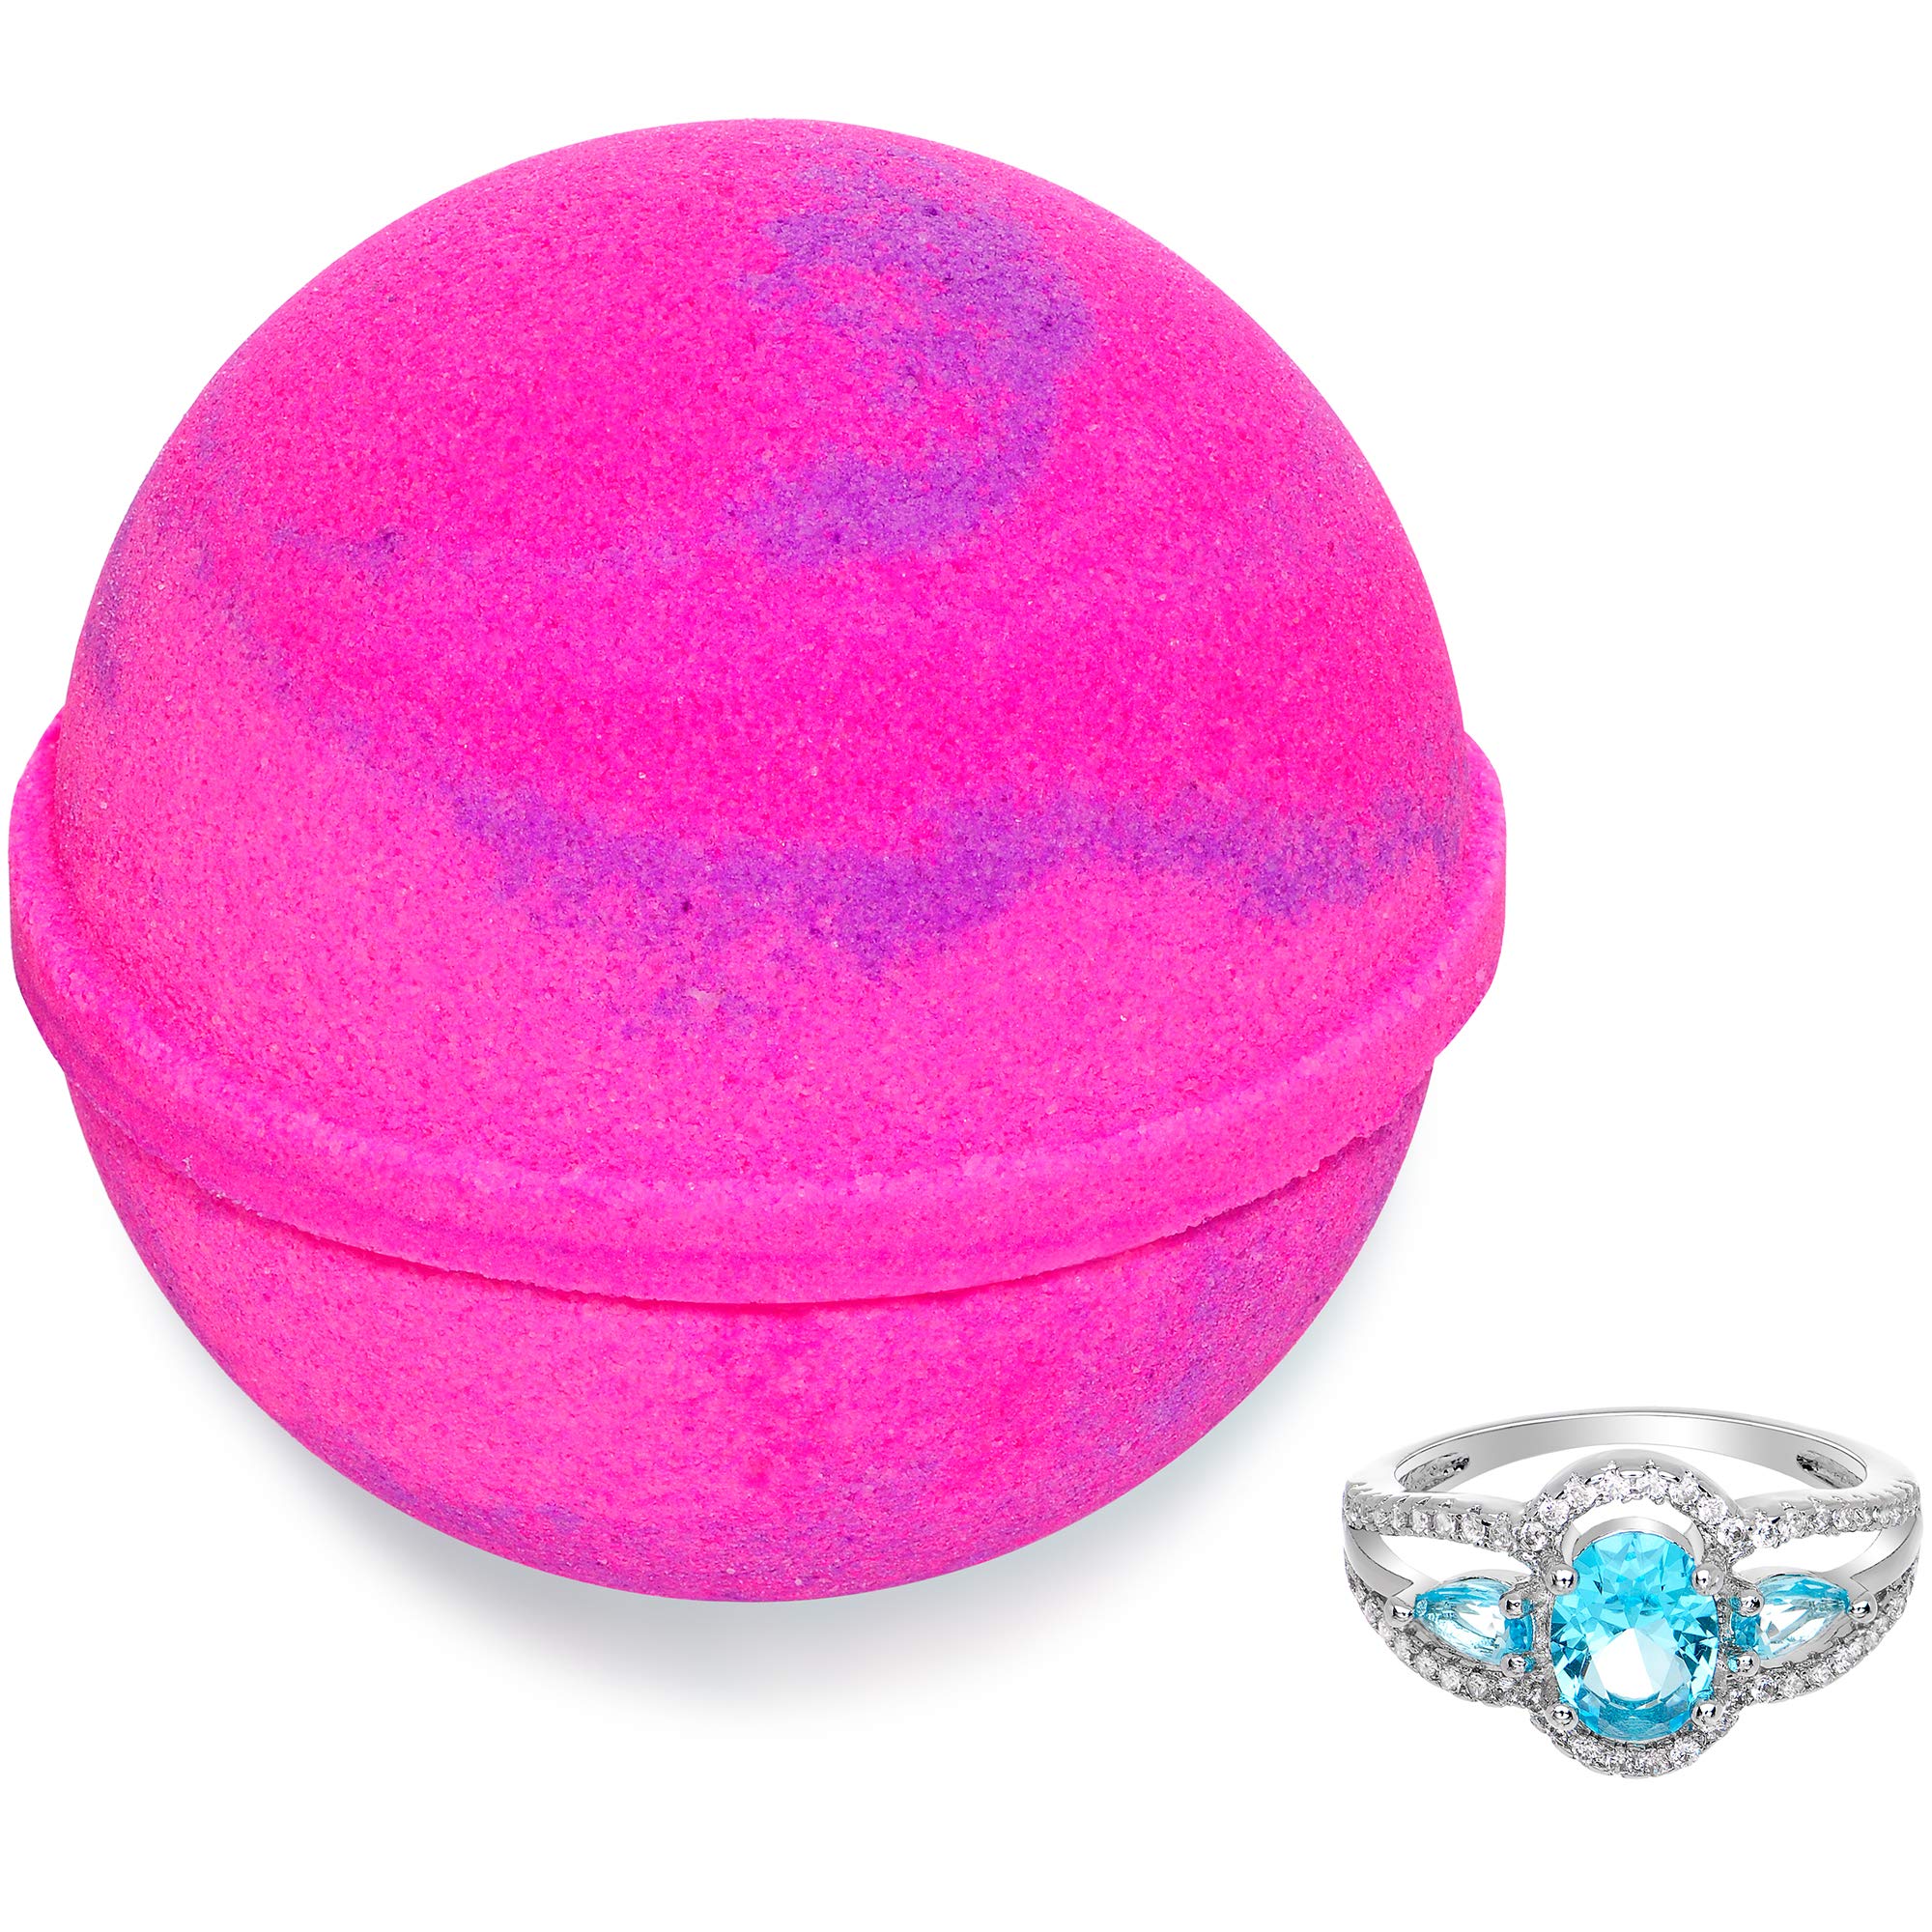 Bath Bomb with Size 5 Ring Inside Love Potion Extra Large 10 oz. Made in USA